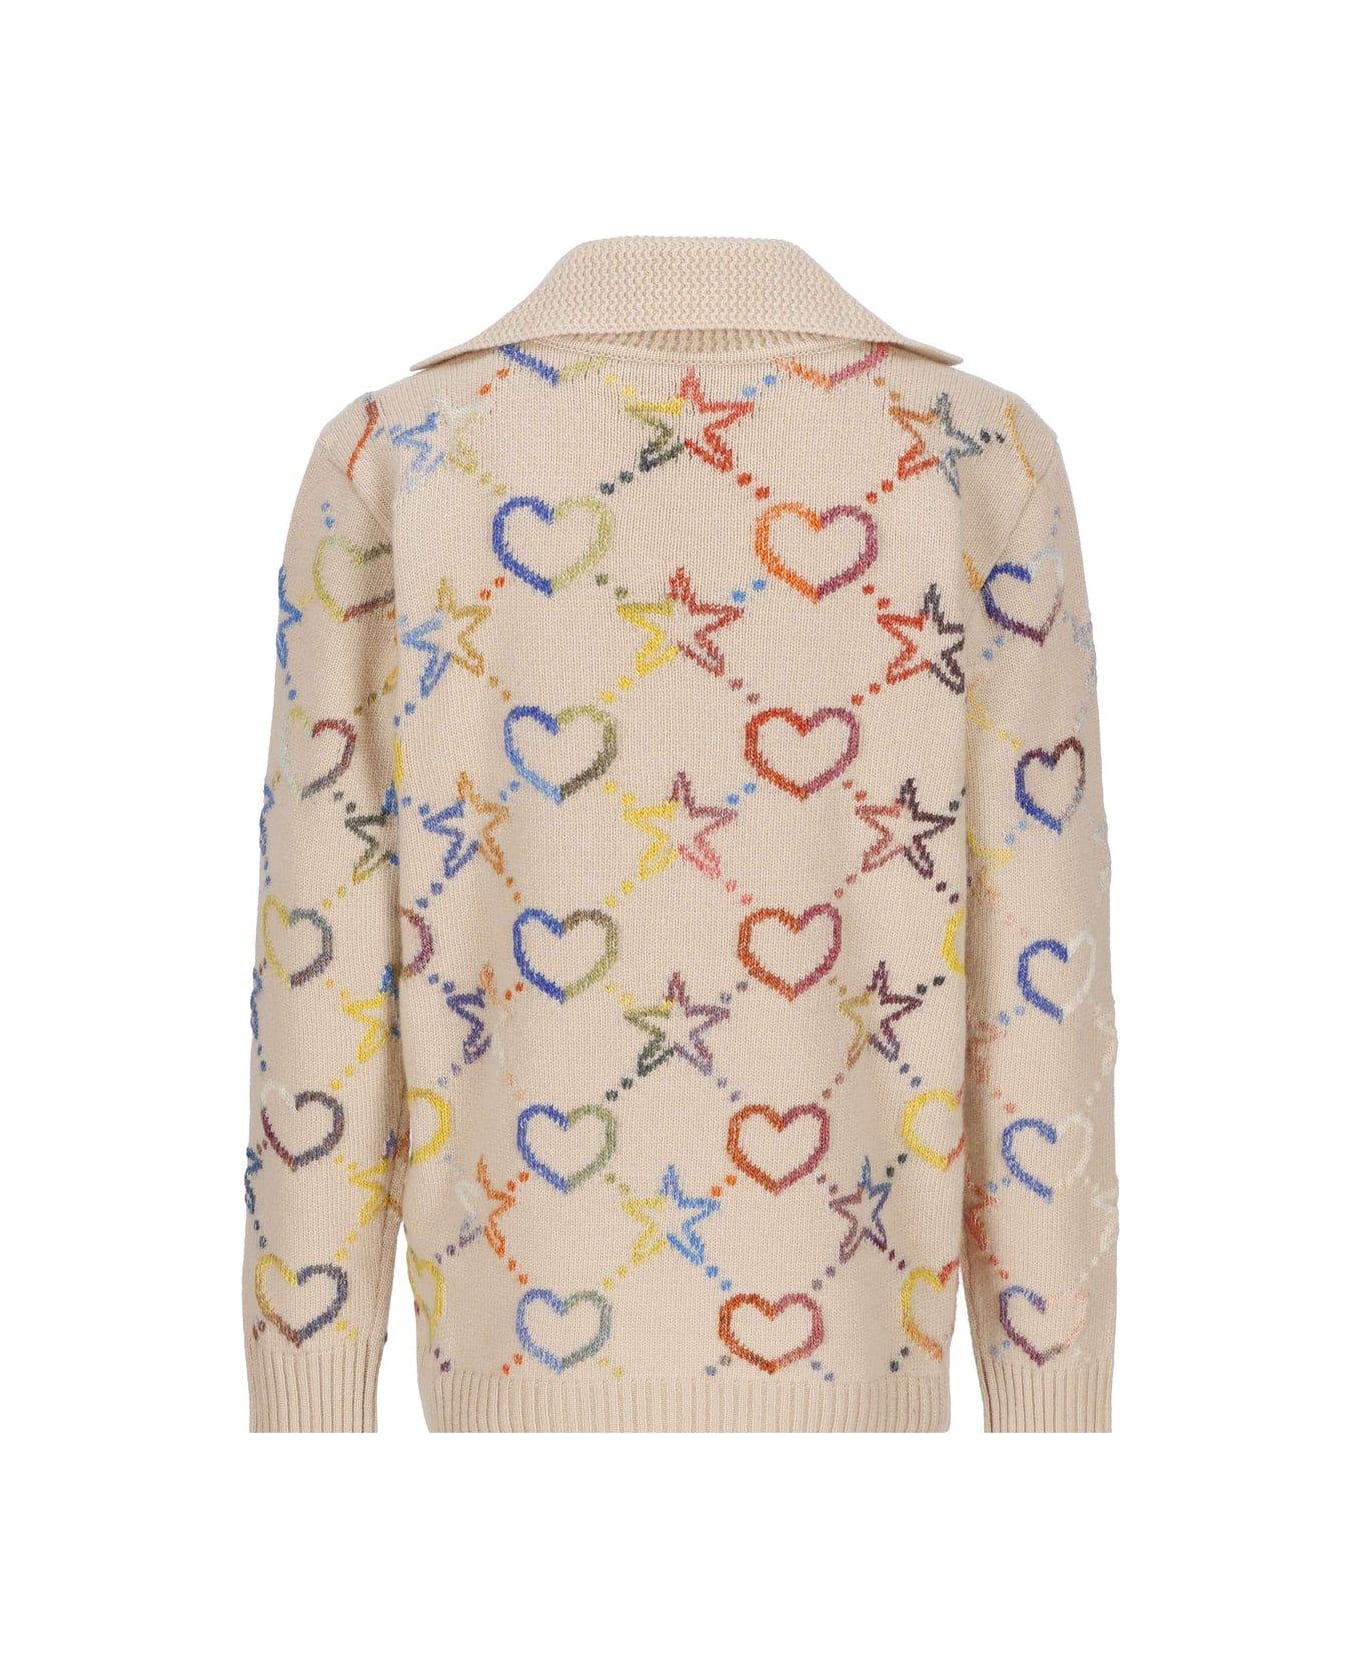 Gucci All-over Patterned Long-sleeved Jumper - Ivory Multicolor